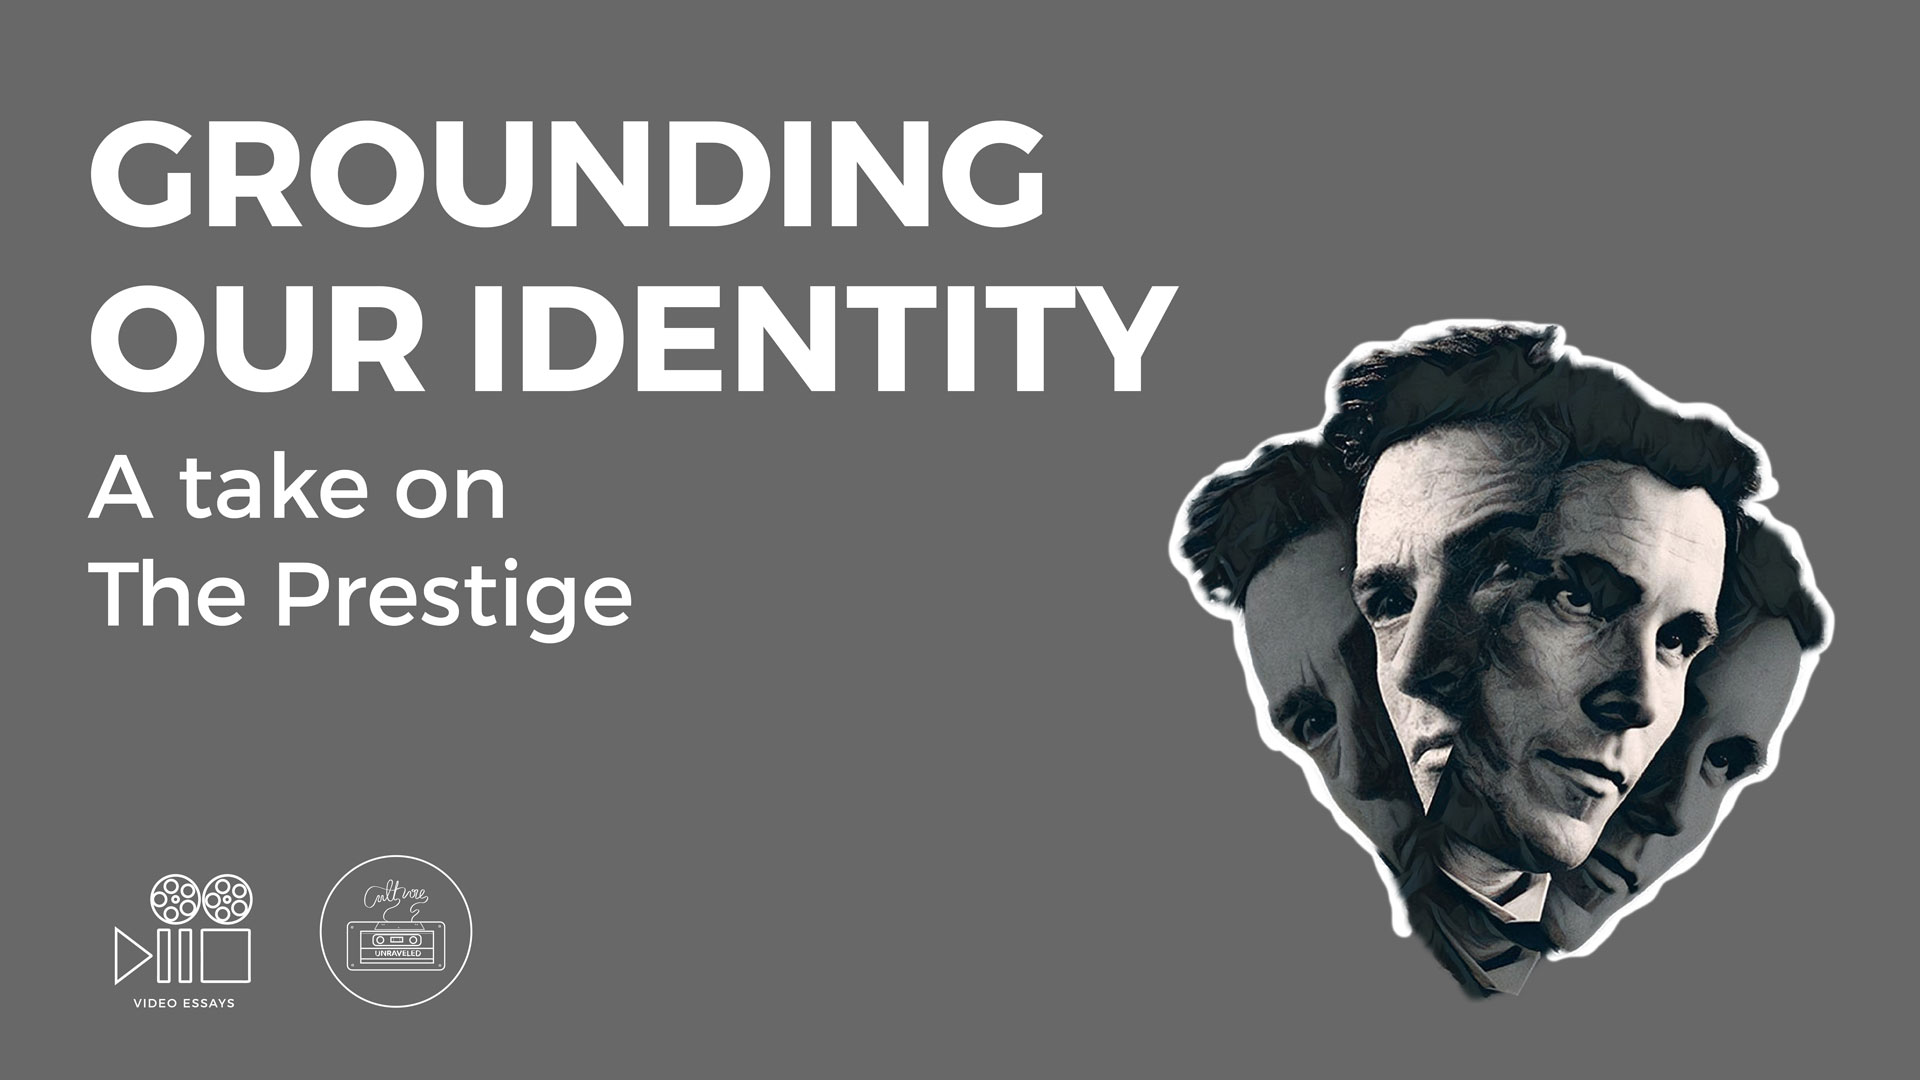 Grounding our Identity.